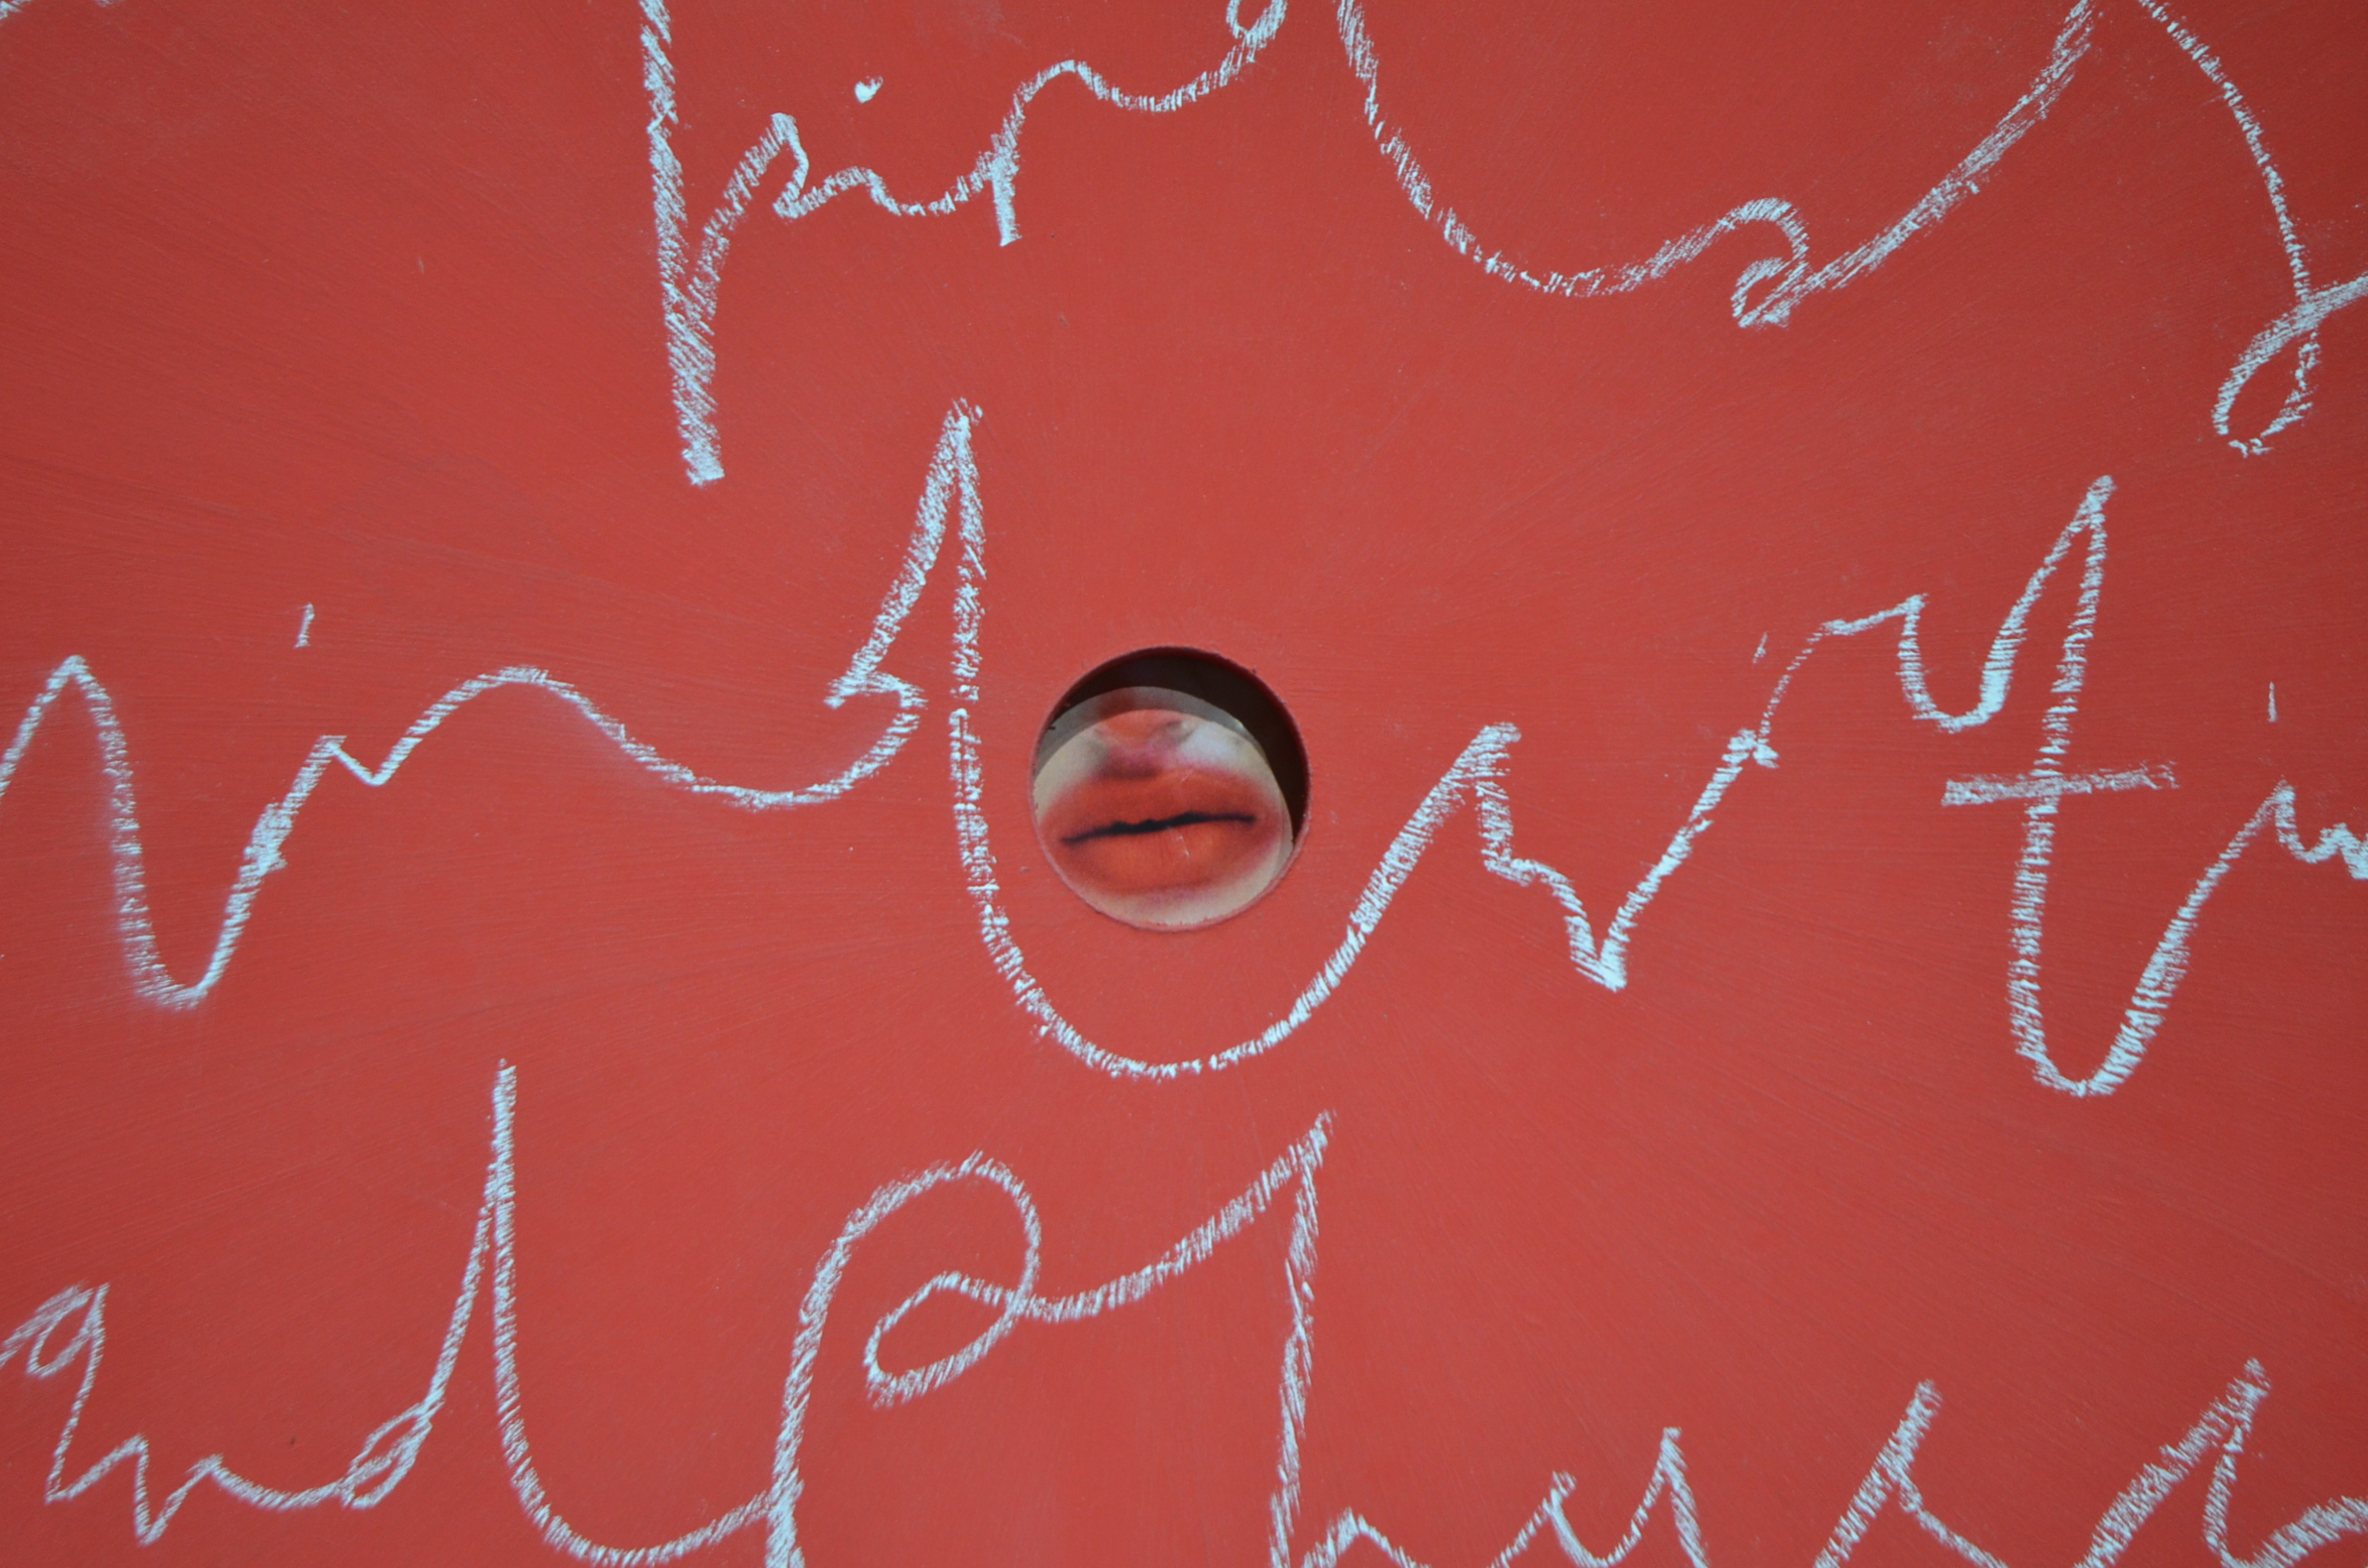 A red screen with writing in chalk. A hole in the board reveals a mouth, with the lips painted in the same shade of red.